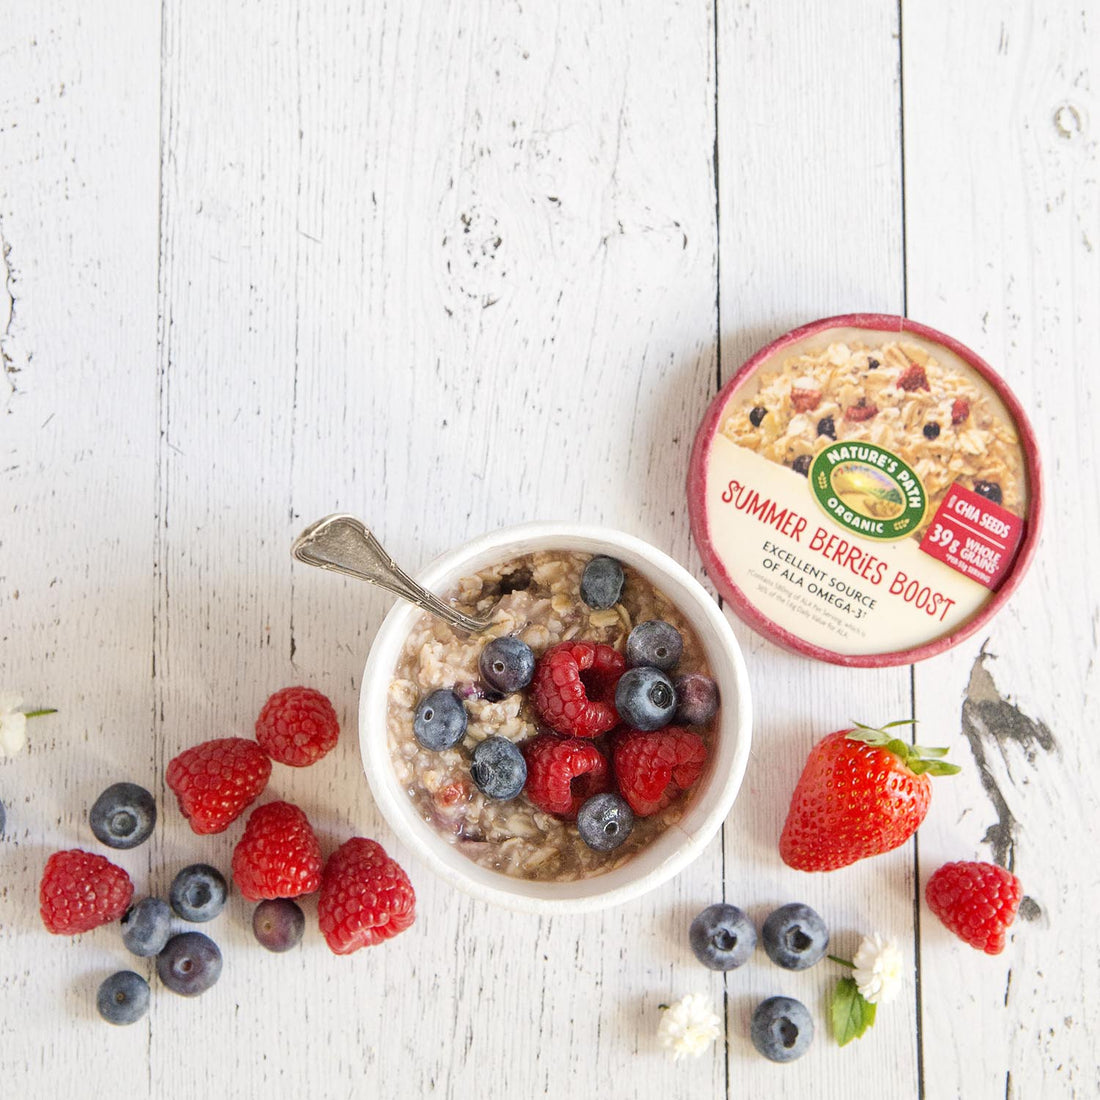 Summer Berries Boost Oatmeal Cup